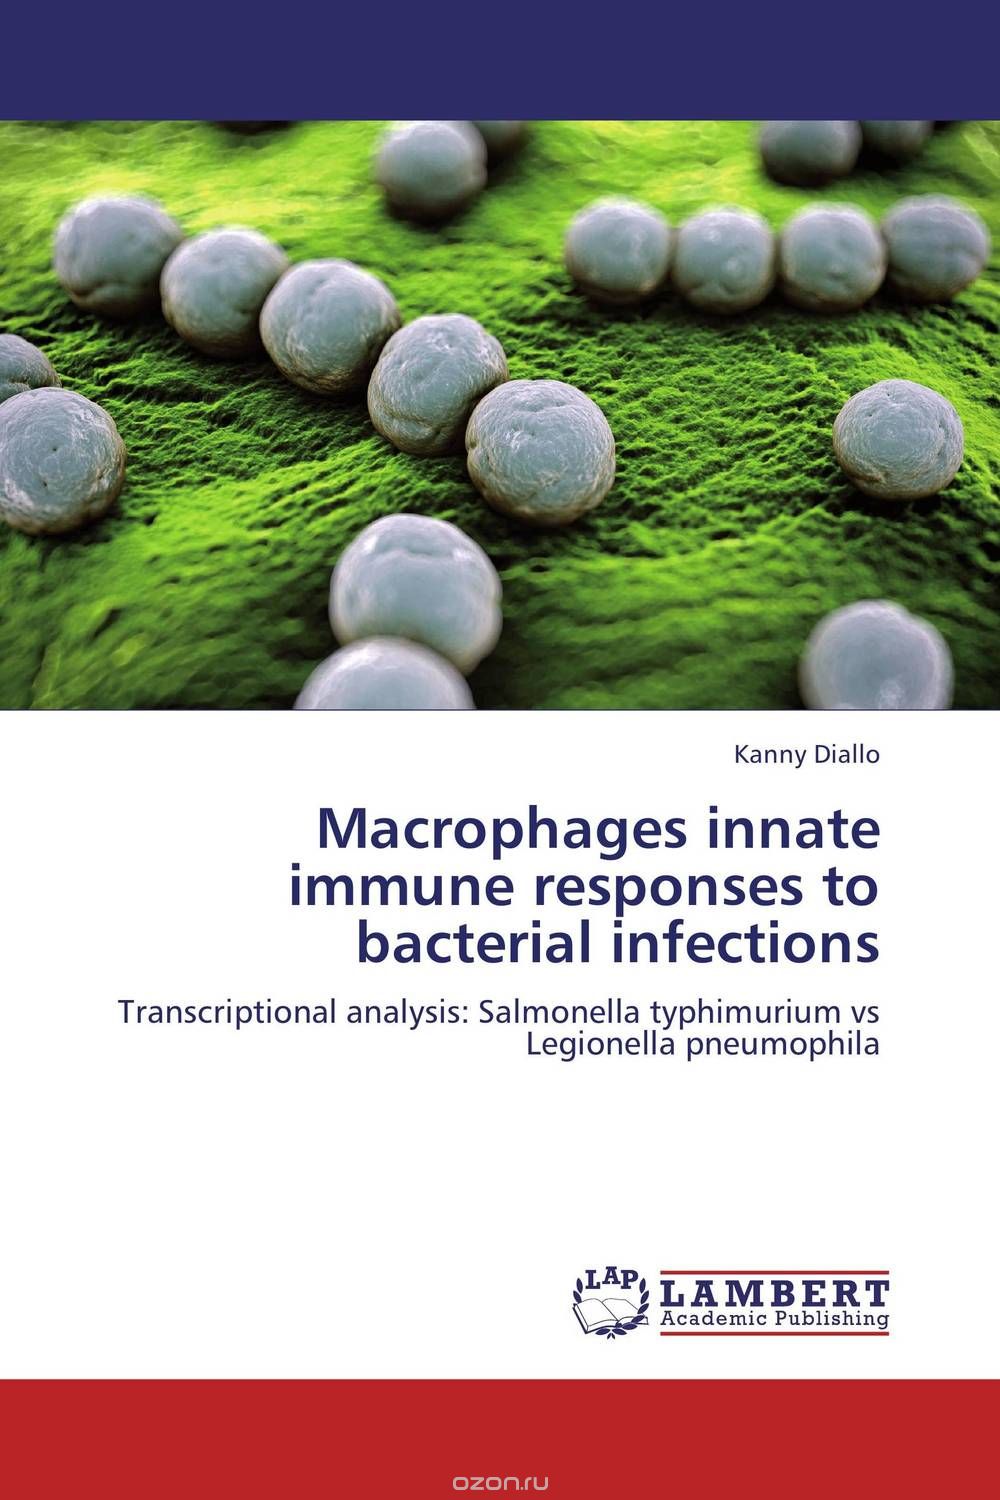 Macrophages innate immune responses to bacterial infections